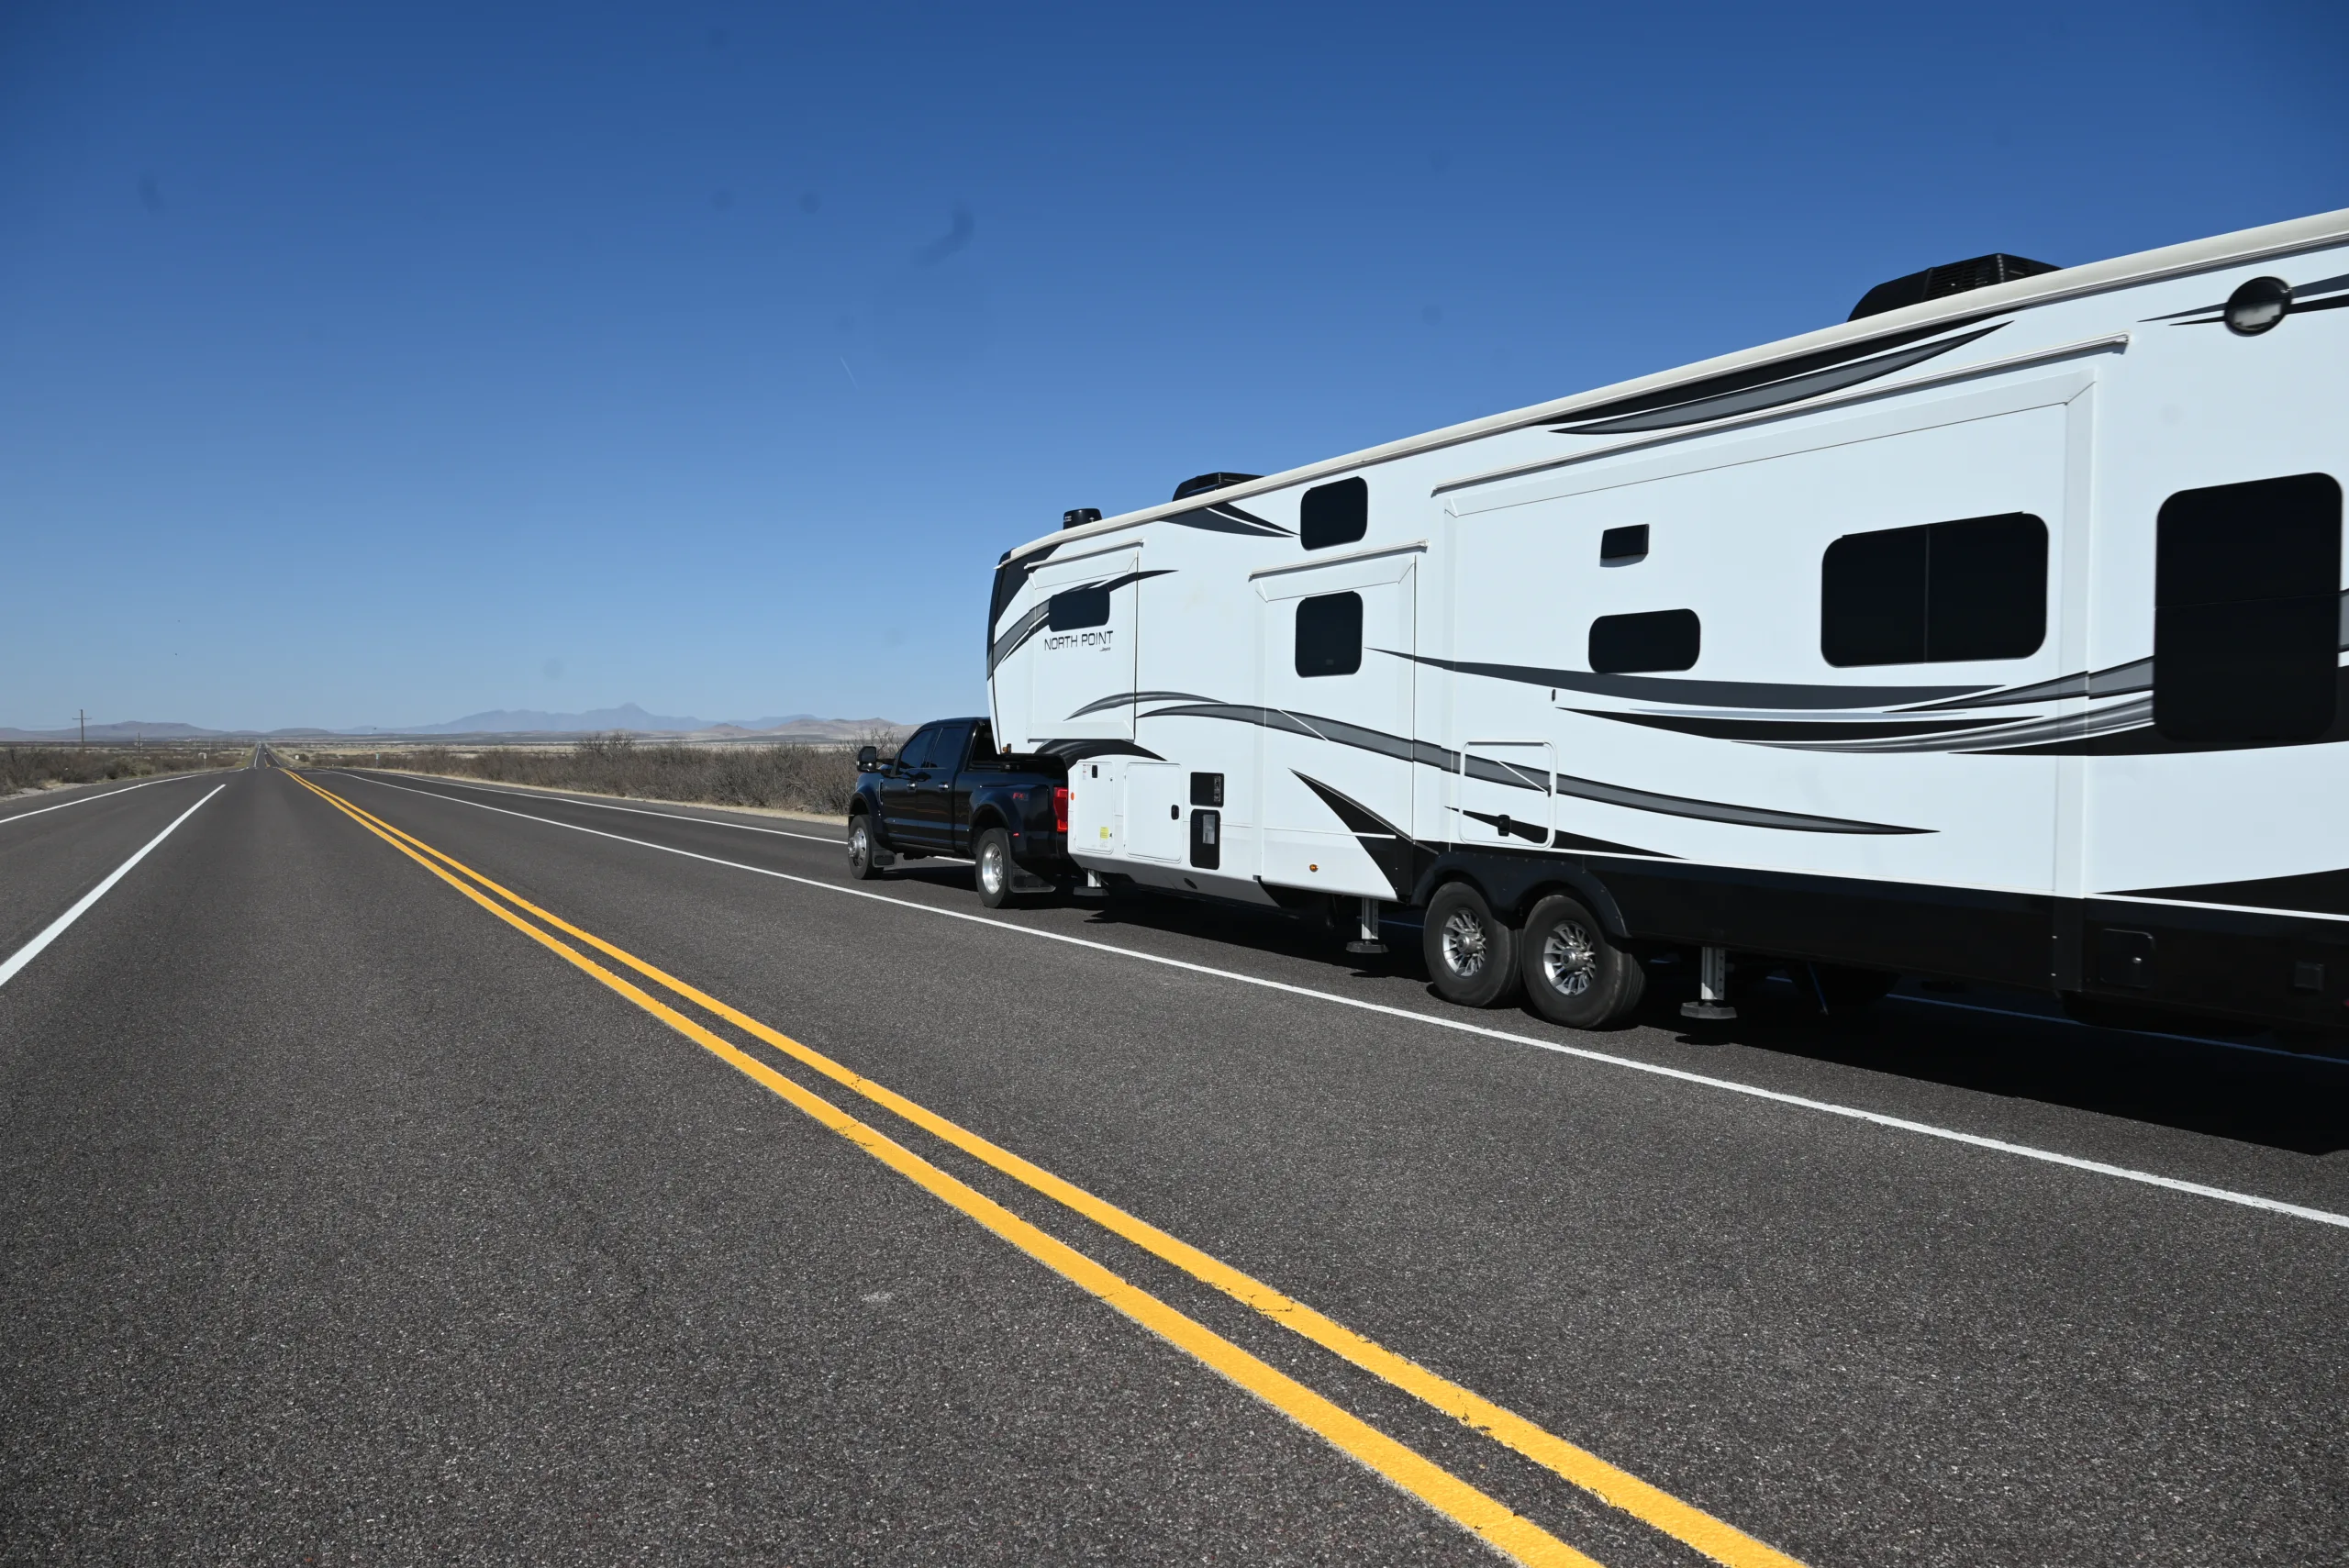 towing an RV on the highway, image for safe driving